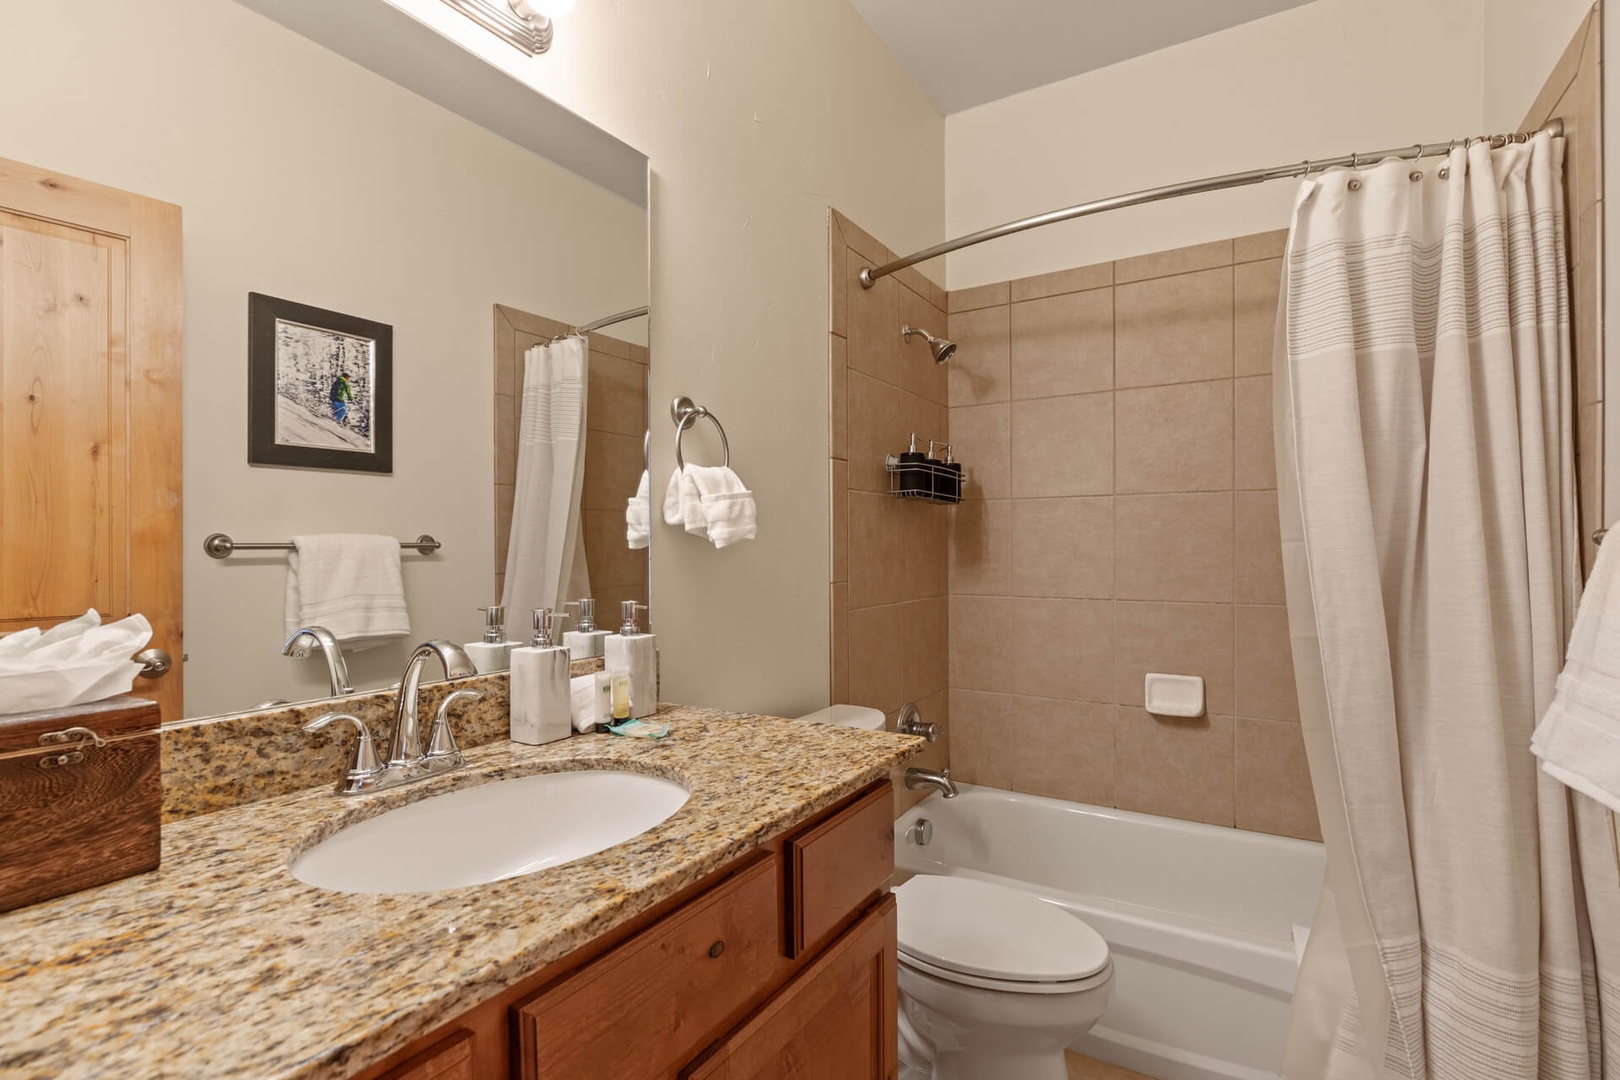 Bear Hollow Lodges 1313:  A second shared large full bathroom space with a sink and tub / shower combo is conveniently located is just across the hall from from the bedrooms.